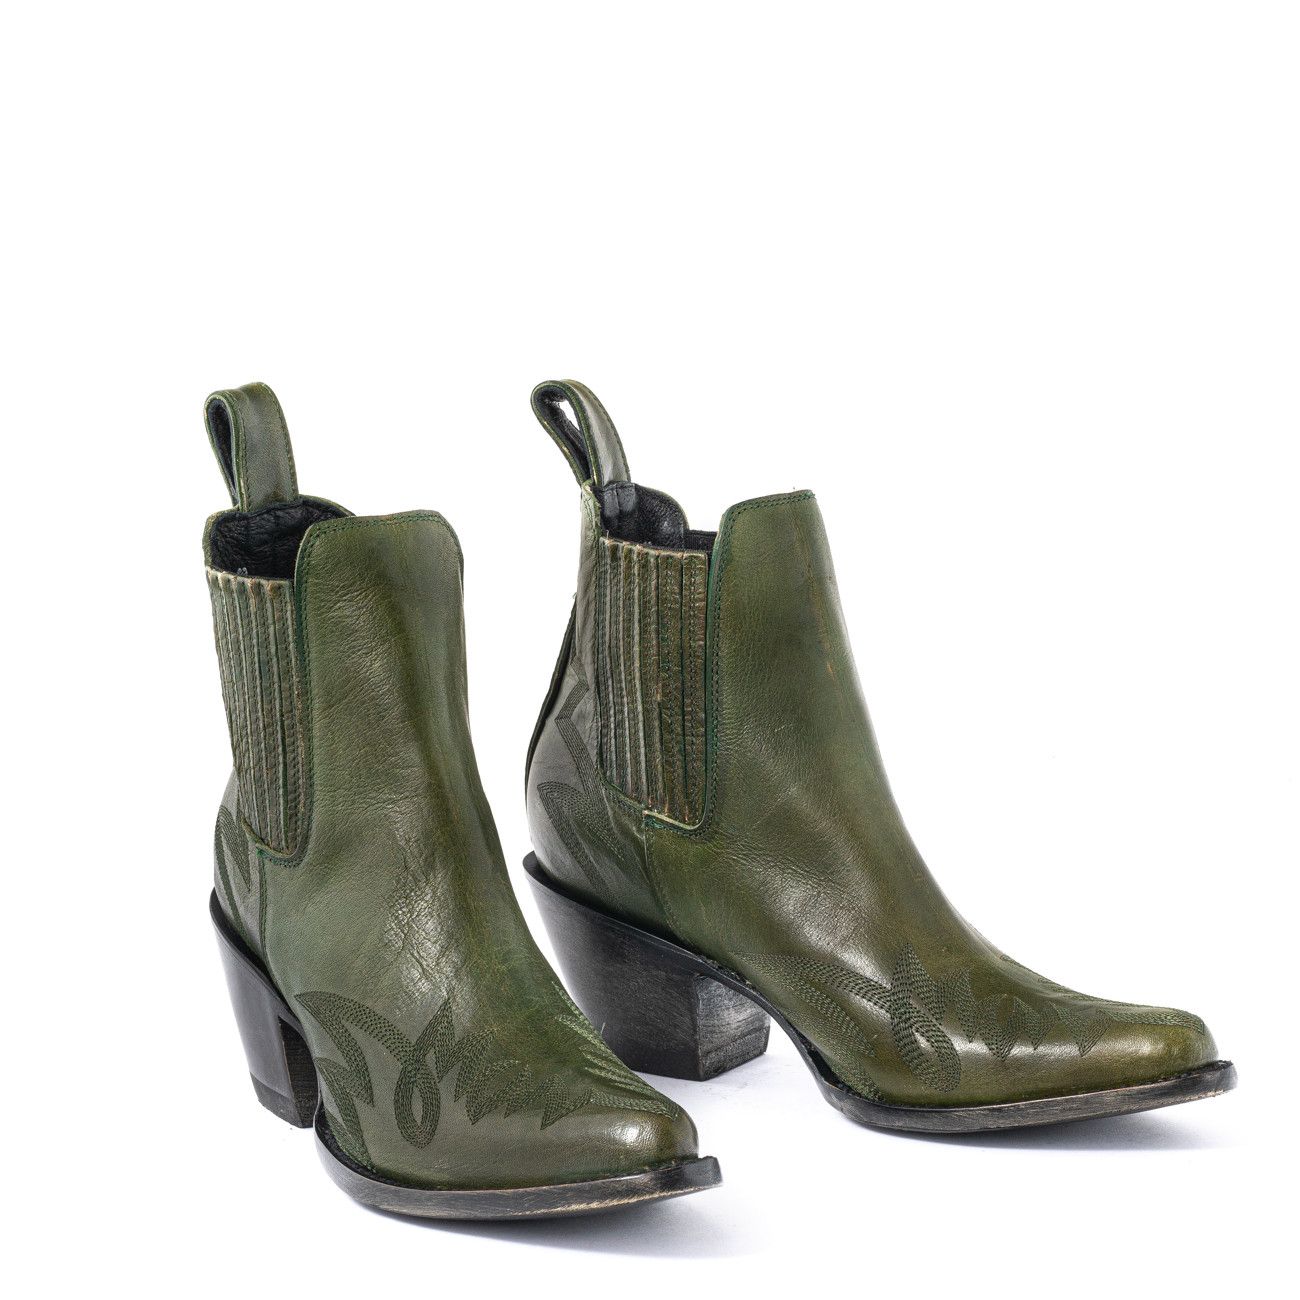 GAUCHO GREEN CYPRESS POINTED TOE ANKLE BOOTS FEATURING FLAMING  STITCHING, ELASTICIZED SIDES COVERED WITH LEATHER  Total heel he